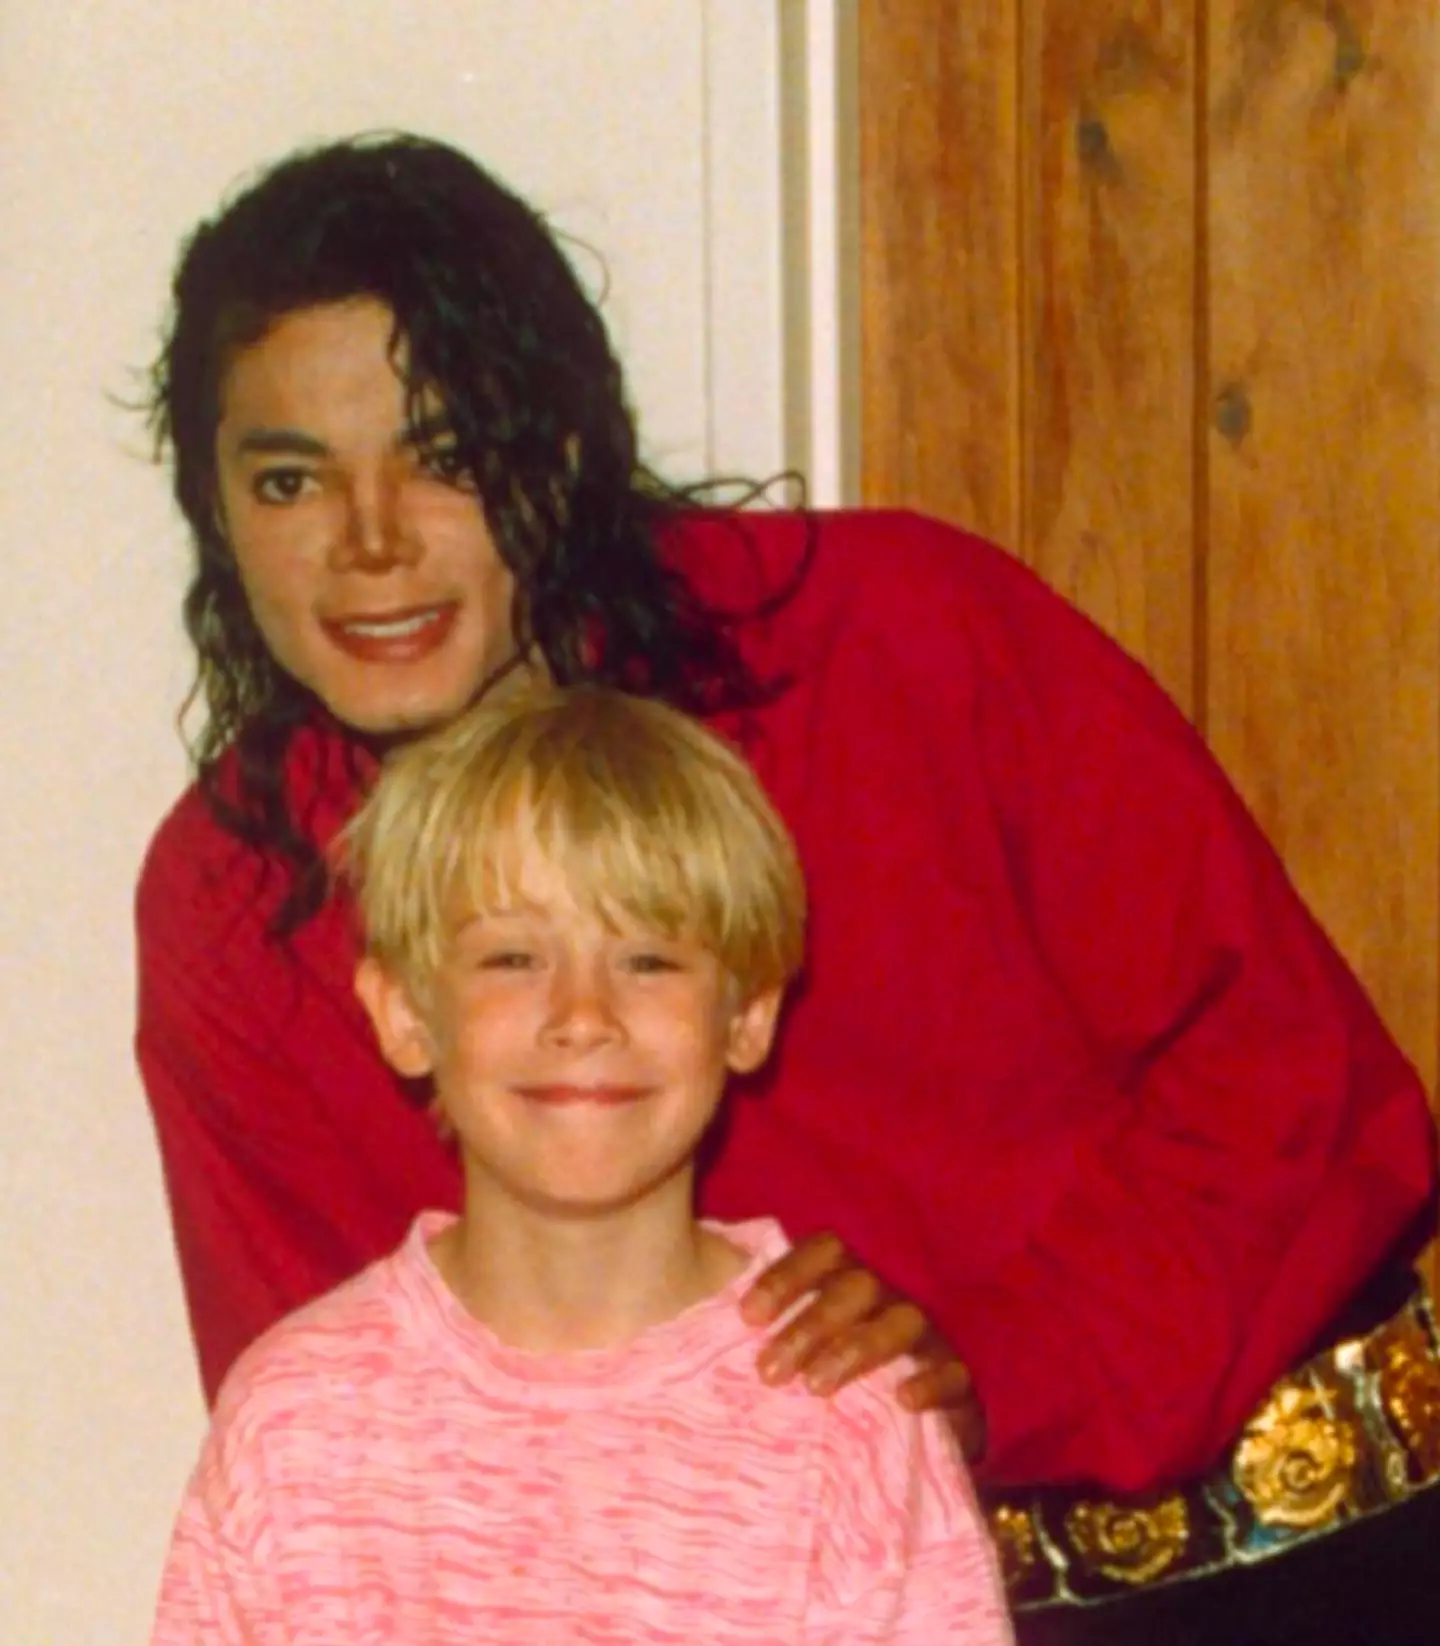 The Home Alone star has previously spoken about a 'weird' phone call with Michael Jackson.